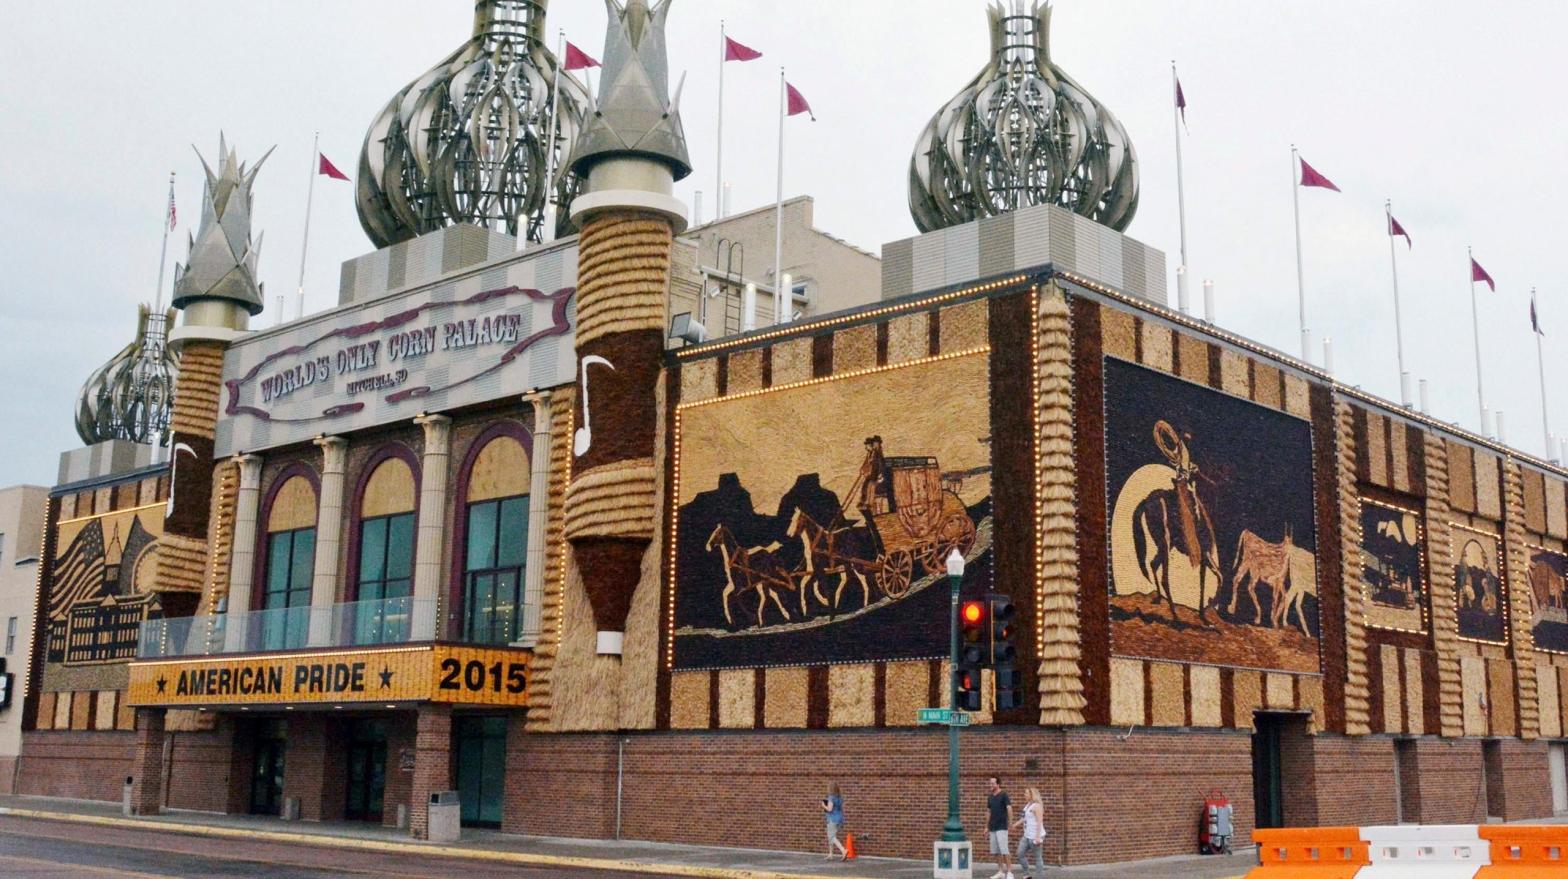 The Corn Palace in Mitchell, South Dakota in 2015. (Photo: Dirk Lammers, AP)